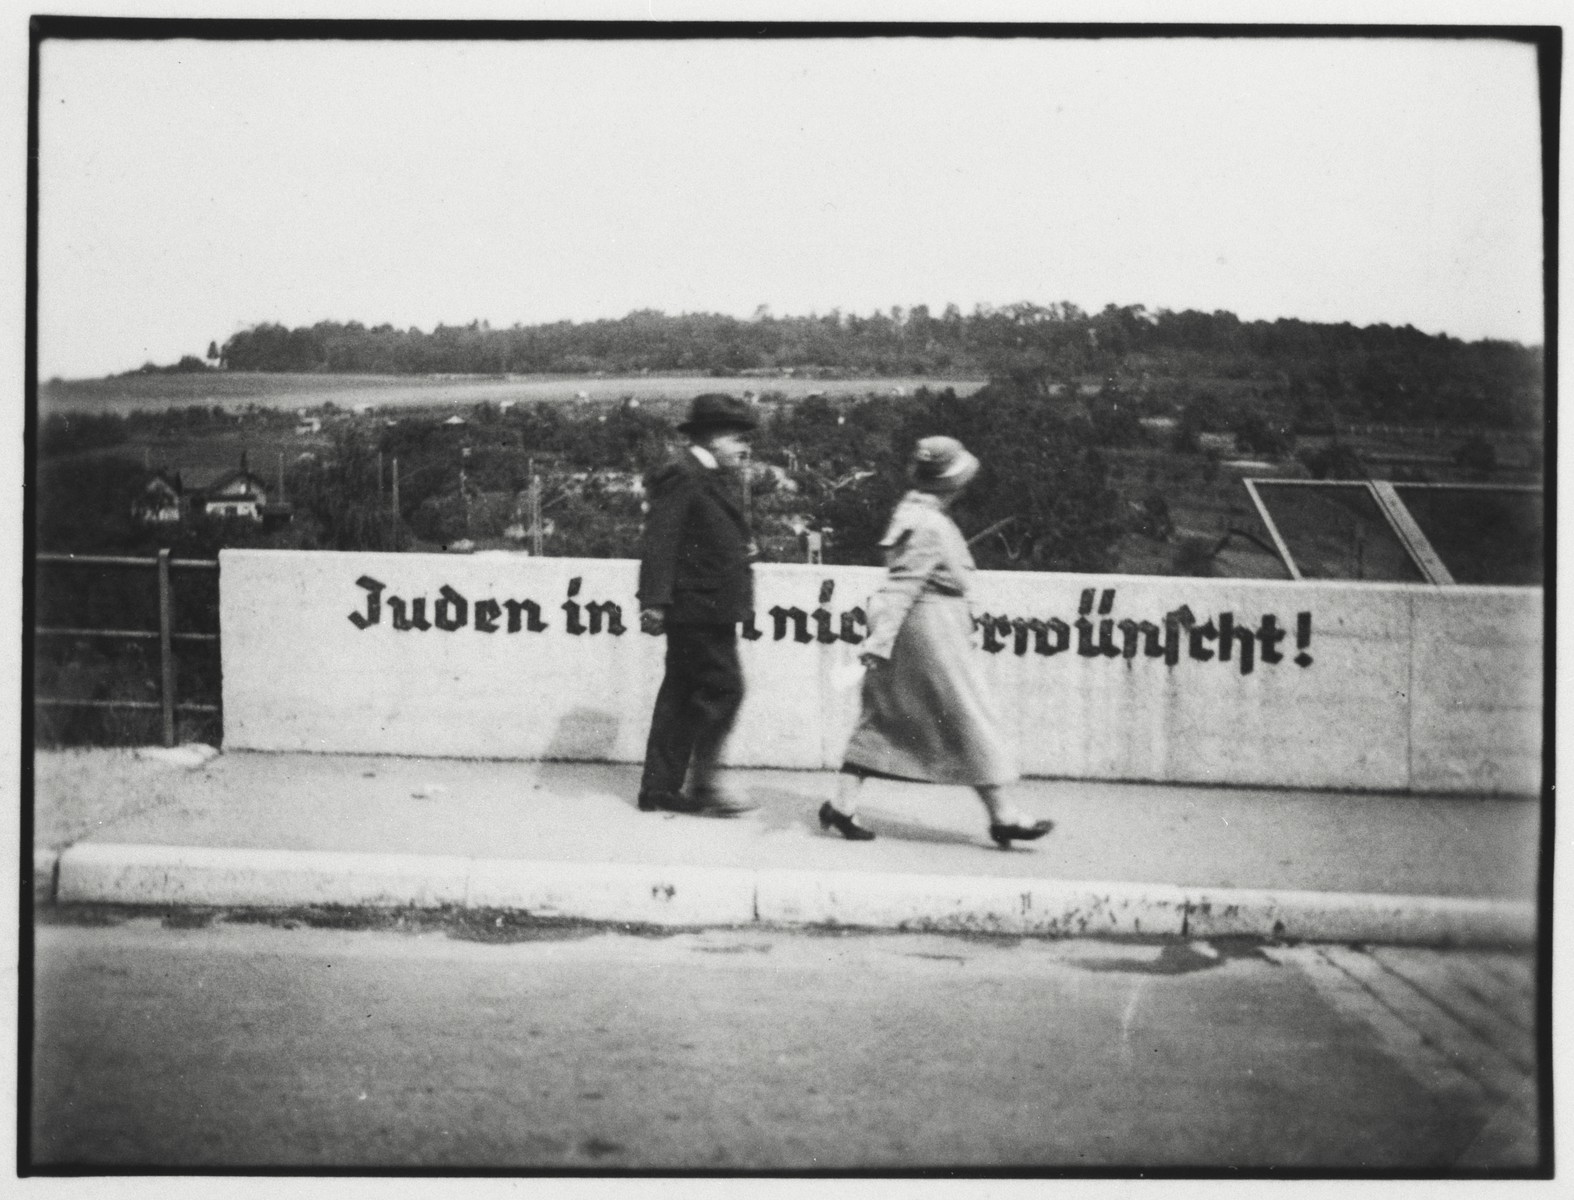 A Jewish gentleman and his daughter cross the Stuttgarter Strasse bridge in Ulm that is painted with the sign "Jews are not desireable in Ulm".

Pictured are Jacob Guggenheimer and Irene Guggenheimer Einstein (the grandfather and mother of the donor).